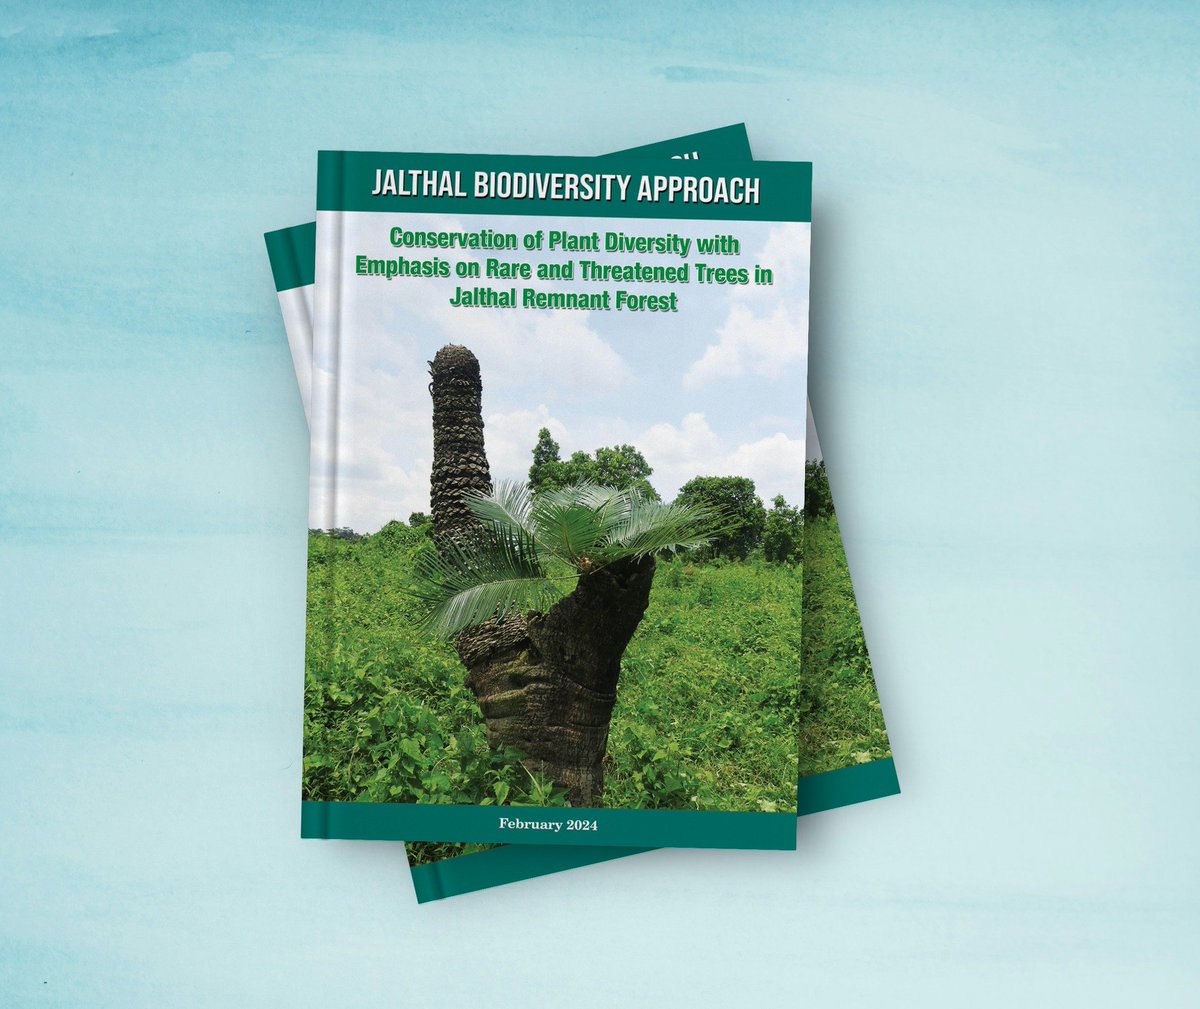 Here comes report on conservation approach taken by ForestAction Nepal led @UKBCFs project. Focuses conservation of rare & threatened tree species in Jalthal remnant forest. Strategies proposed are result of ecological survey, review & local workshops. forestaction.org/publications/c…